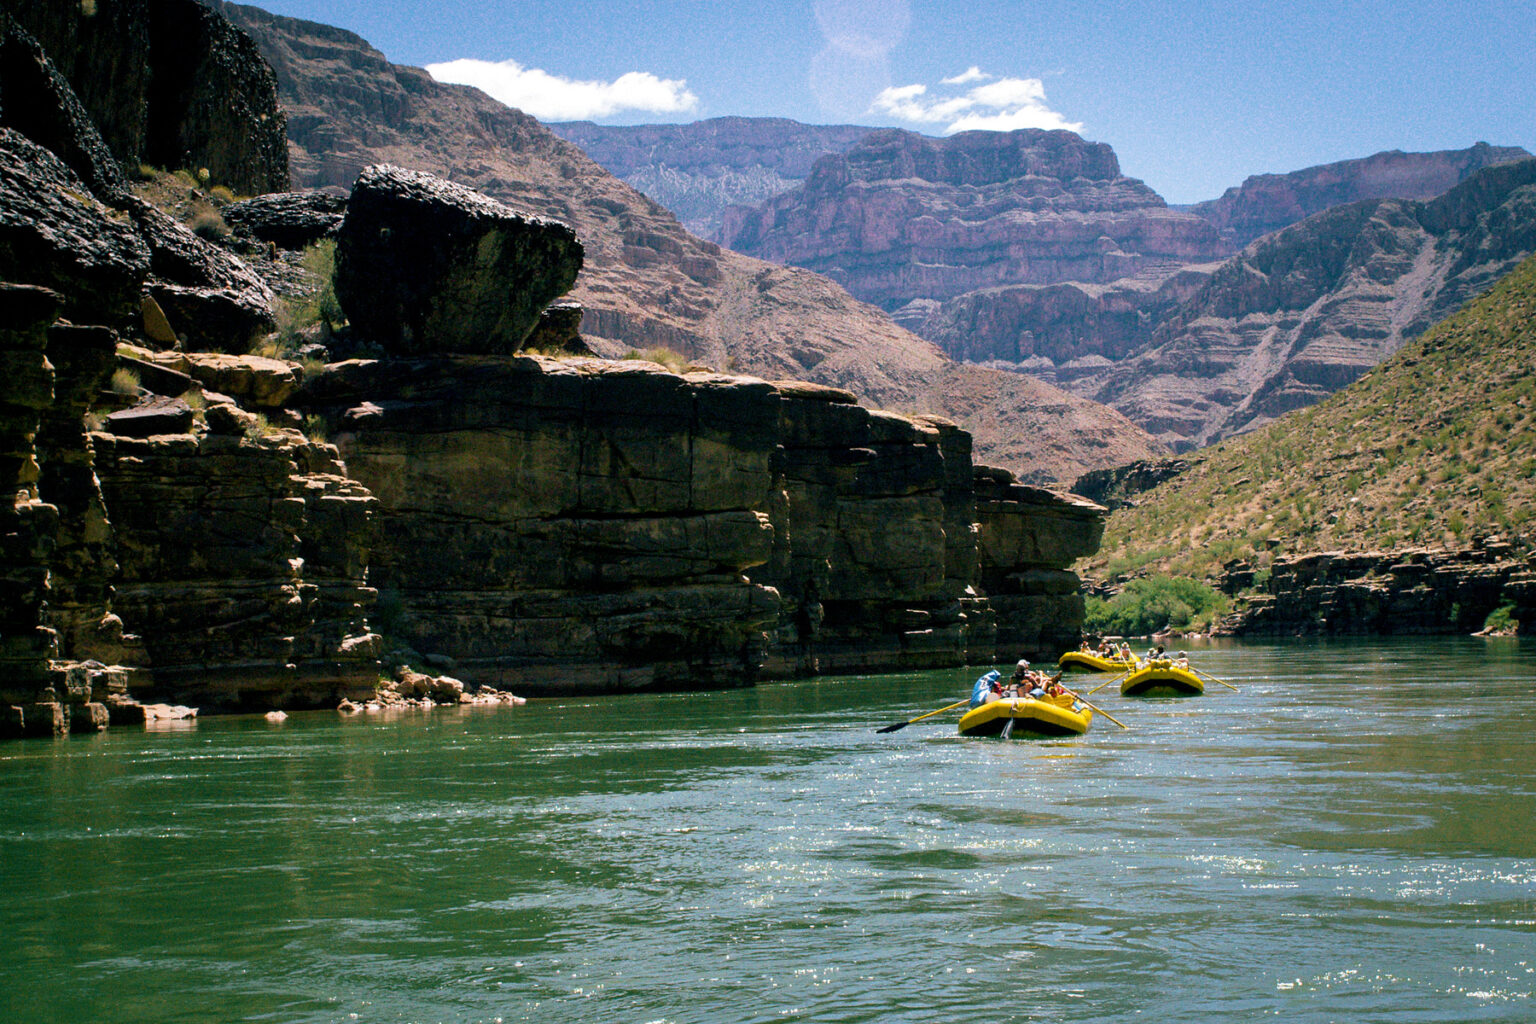 OARS rafts in green water of Colorado River in Grand Canyon